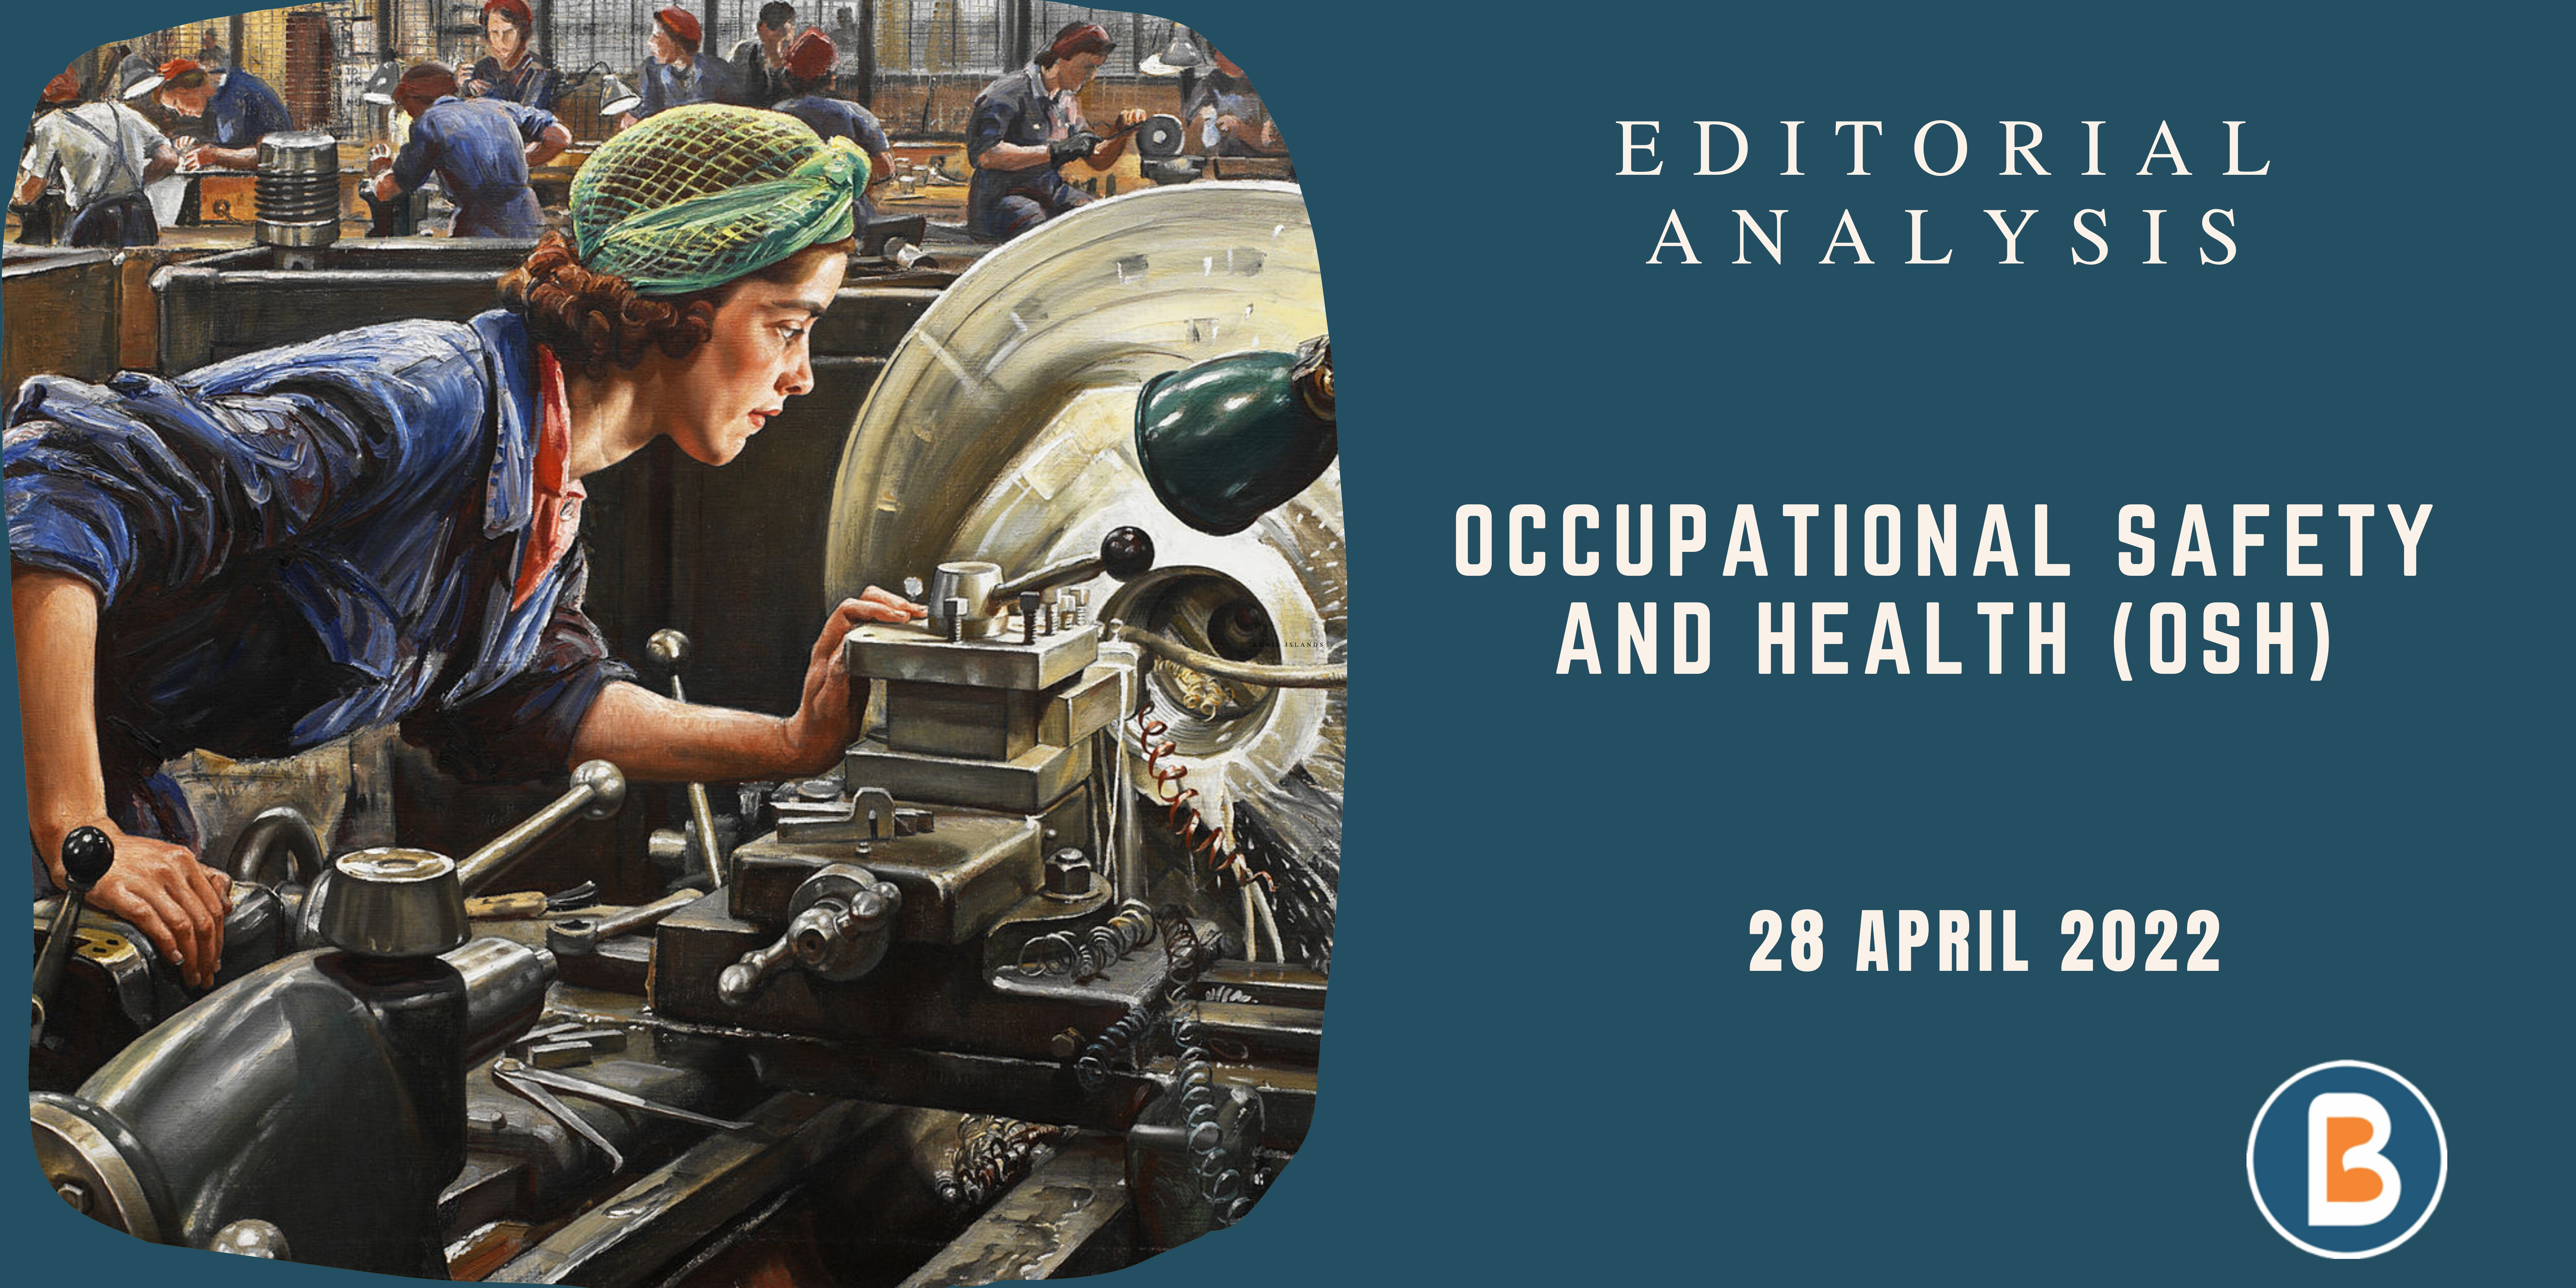 Editorial Analysis for UPSC - Occupational Safety and Health (OSH)